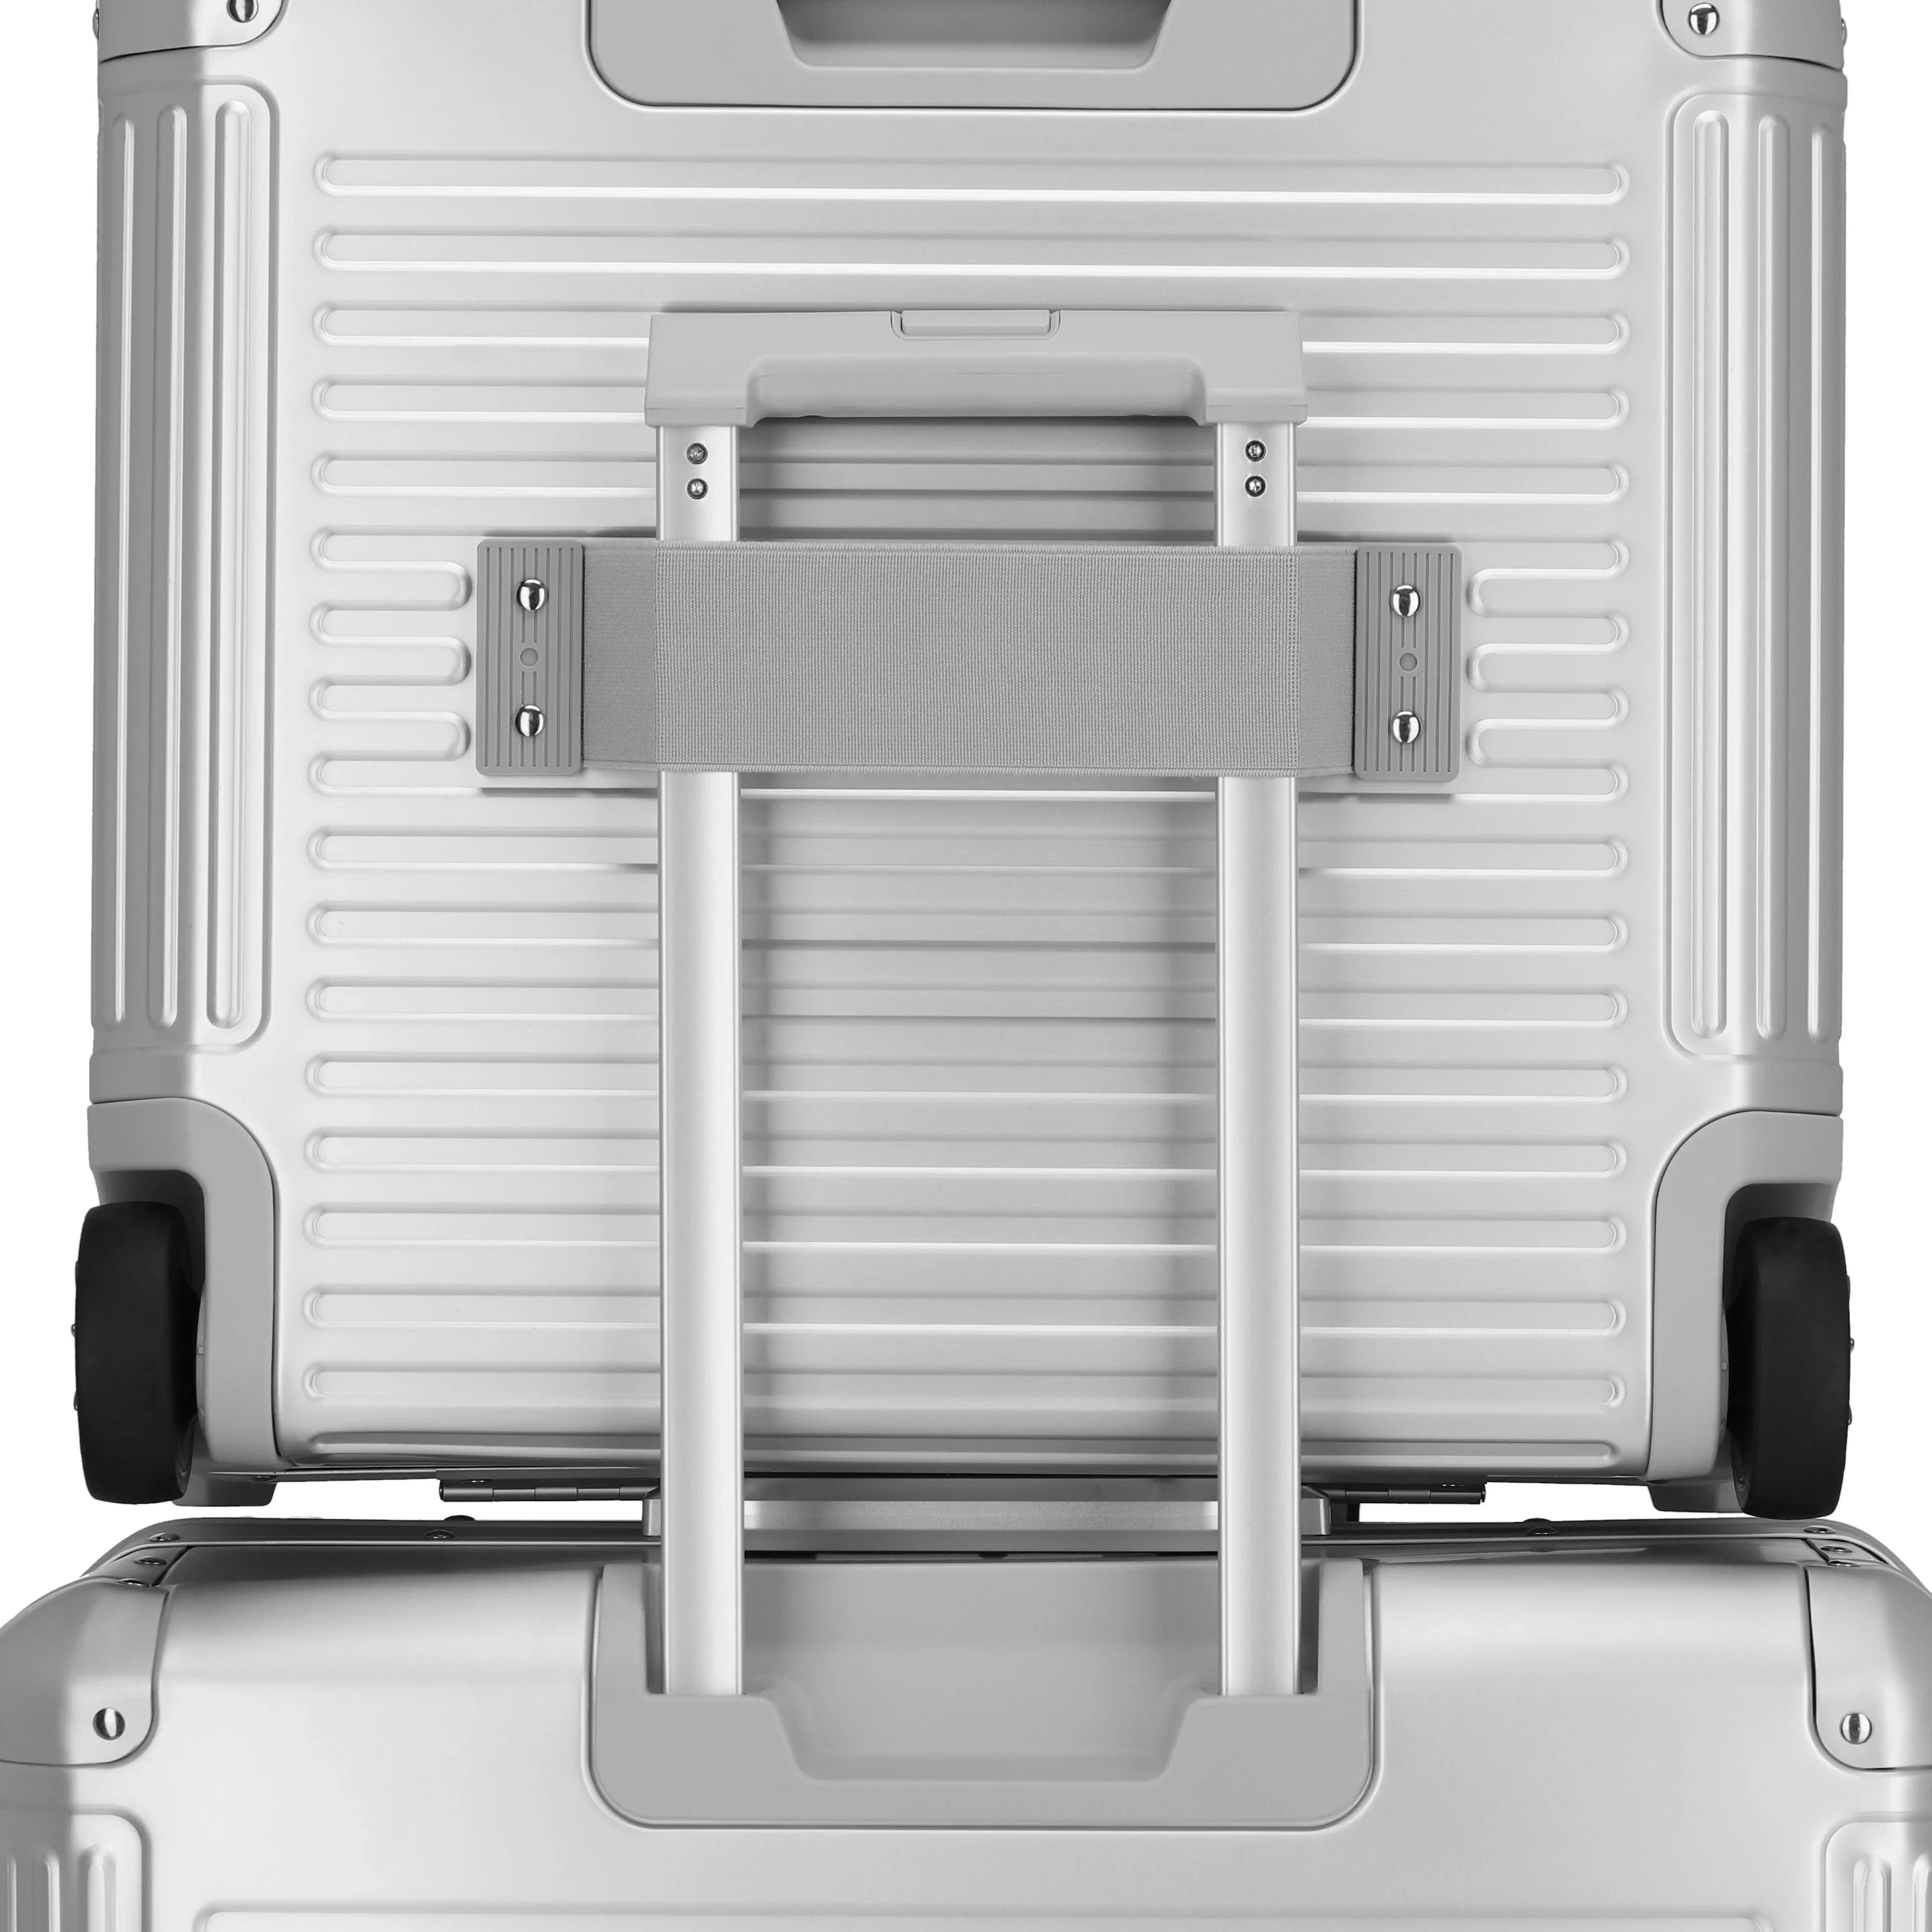 Travelite NEXT 2-roll business trolley 45 cm - silver